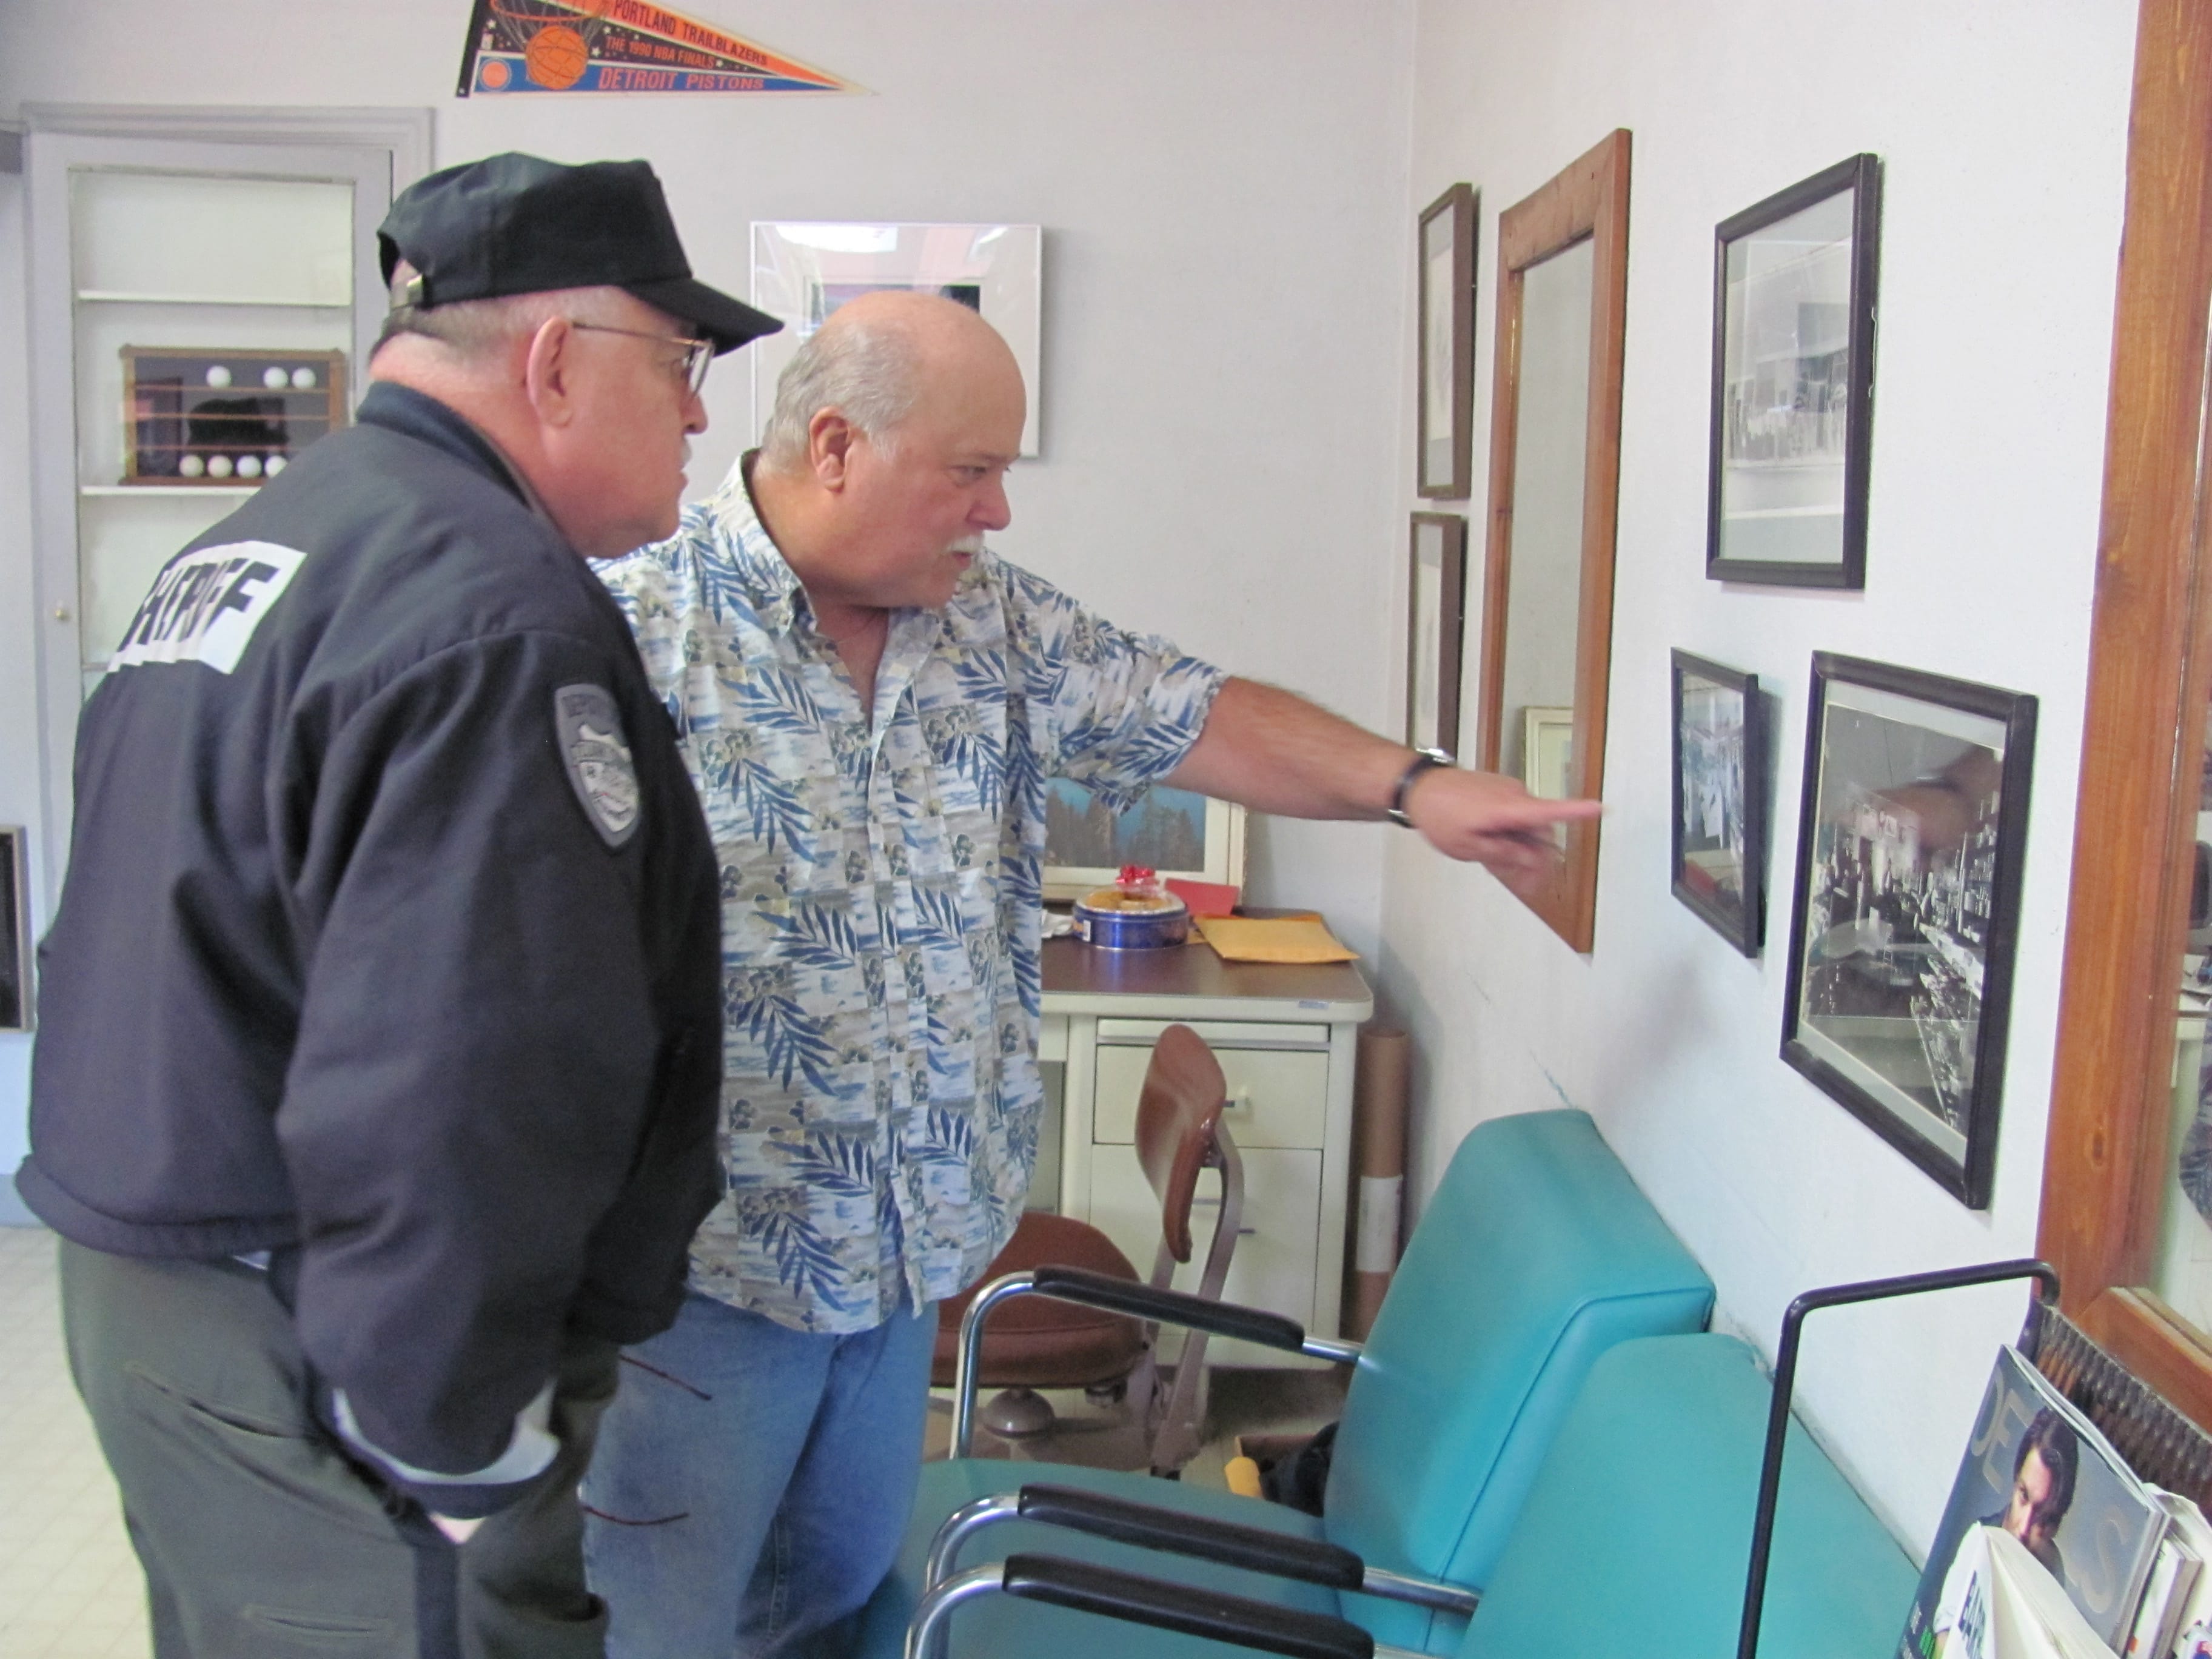 Retiring Clark County Sheriff Garry Lucas (left) recently looked at historical photos of downtown Camas, with Lyle Shaver (right), former owner of Sportsman Barber Shop. That business is located at 214 N.E.